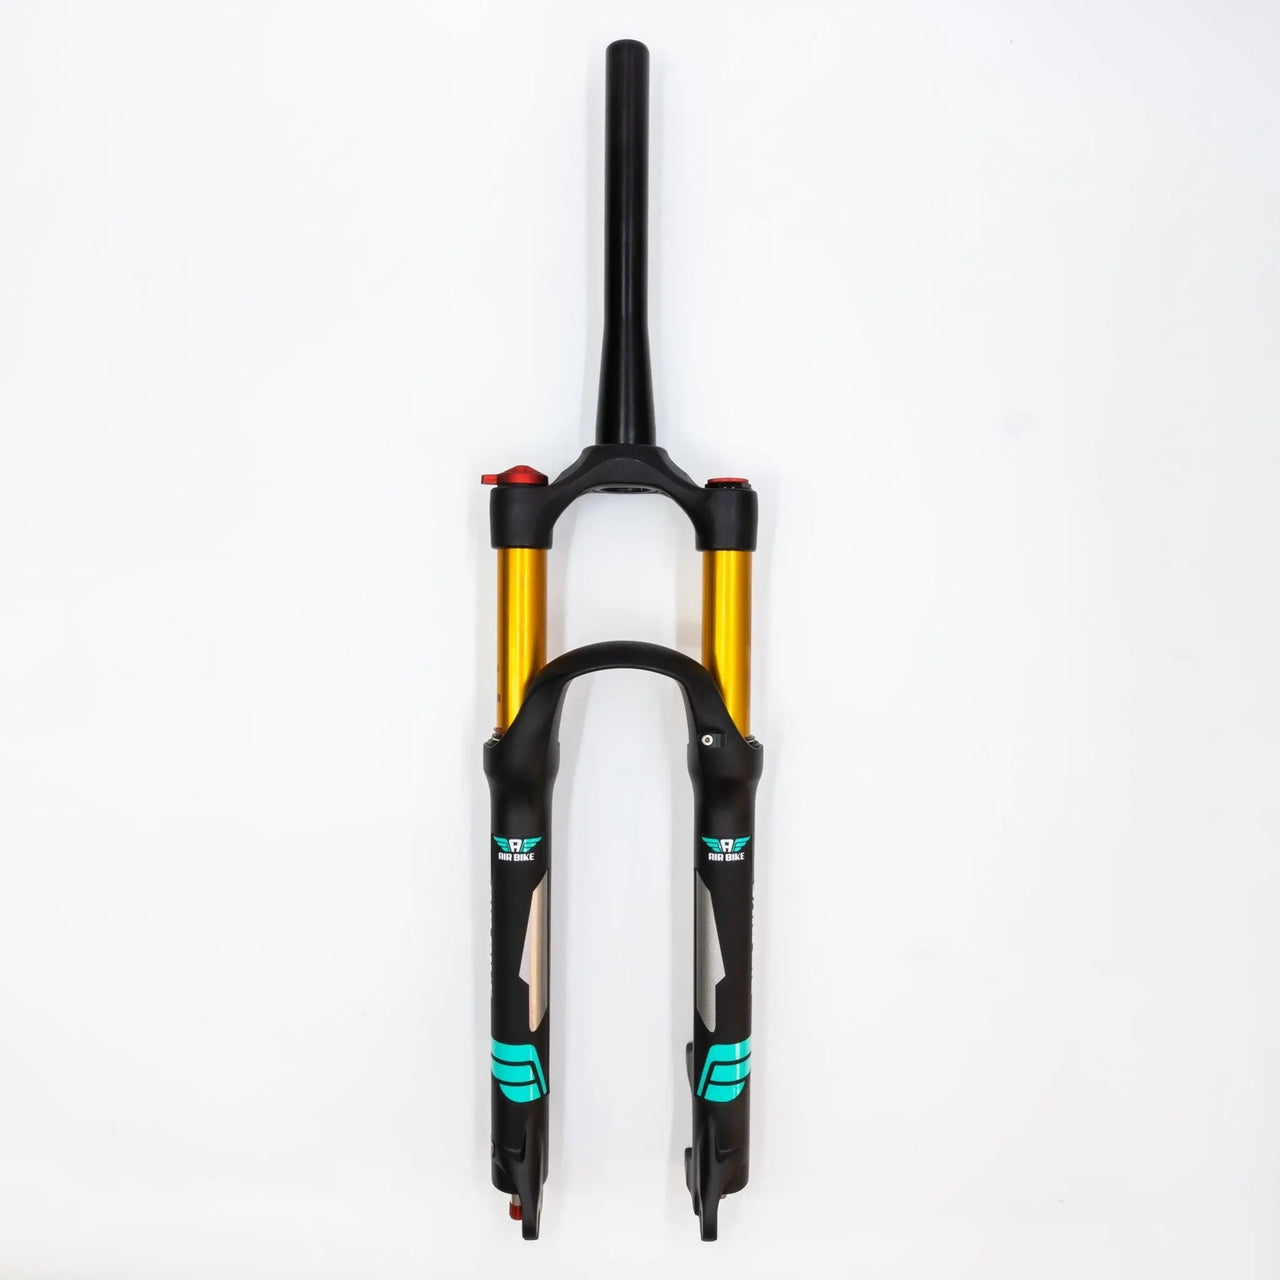 29 Inch Air Fork Tapered XC32A Black 140mm Travel & Rebound Suspension Fork Air Bike - Air BikeSuspension Fork